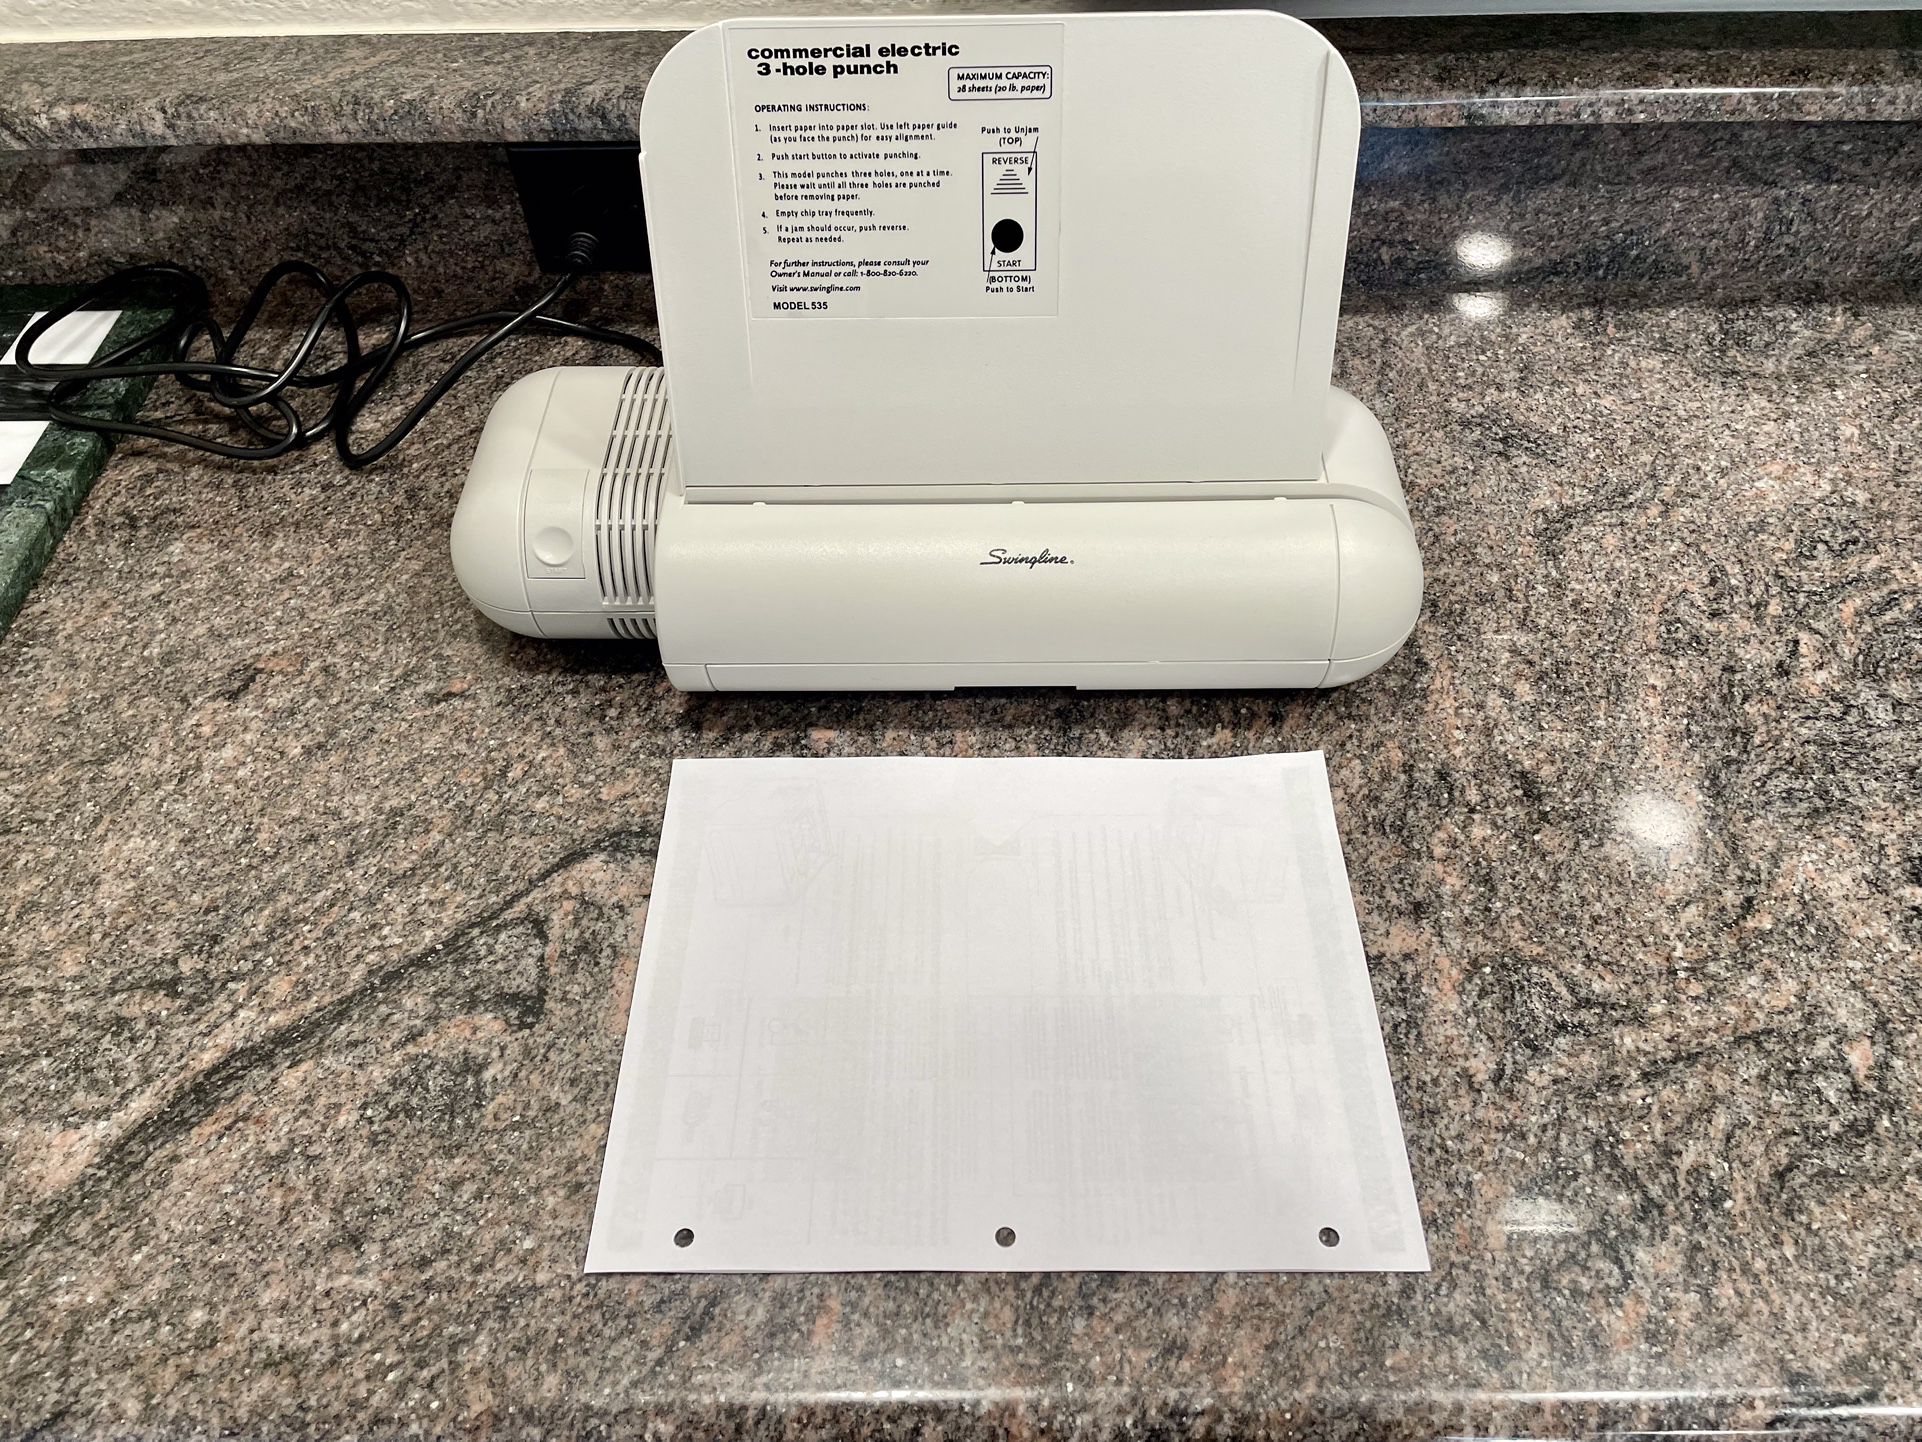 Swingline Commercial Electric 3-Hole Punch 28-Sheet Capacity Model 535  tested for Sale in The Bronx, NY - OfferUp